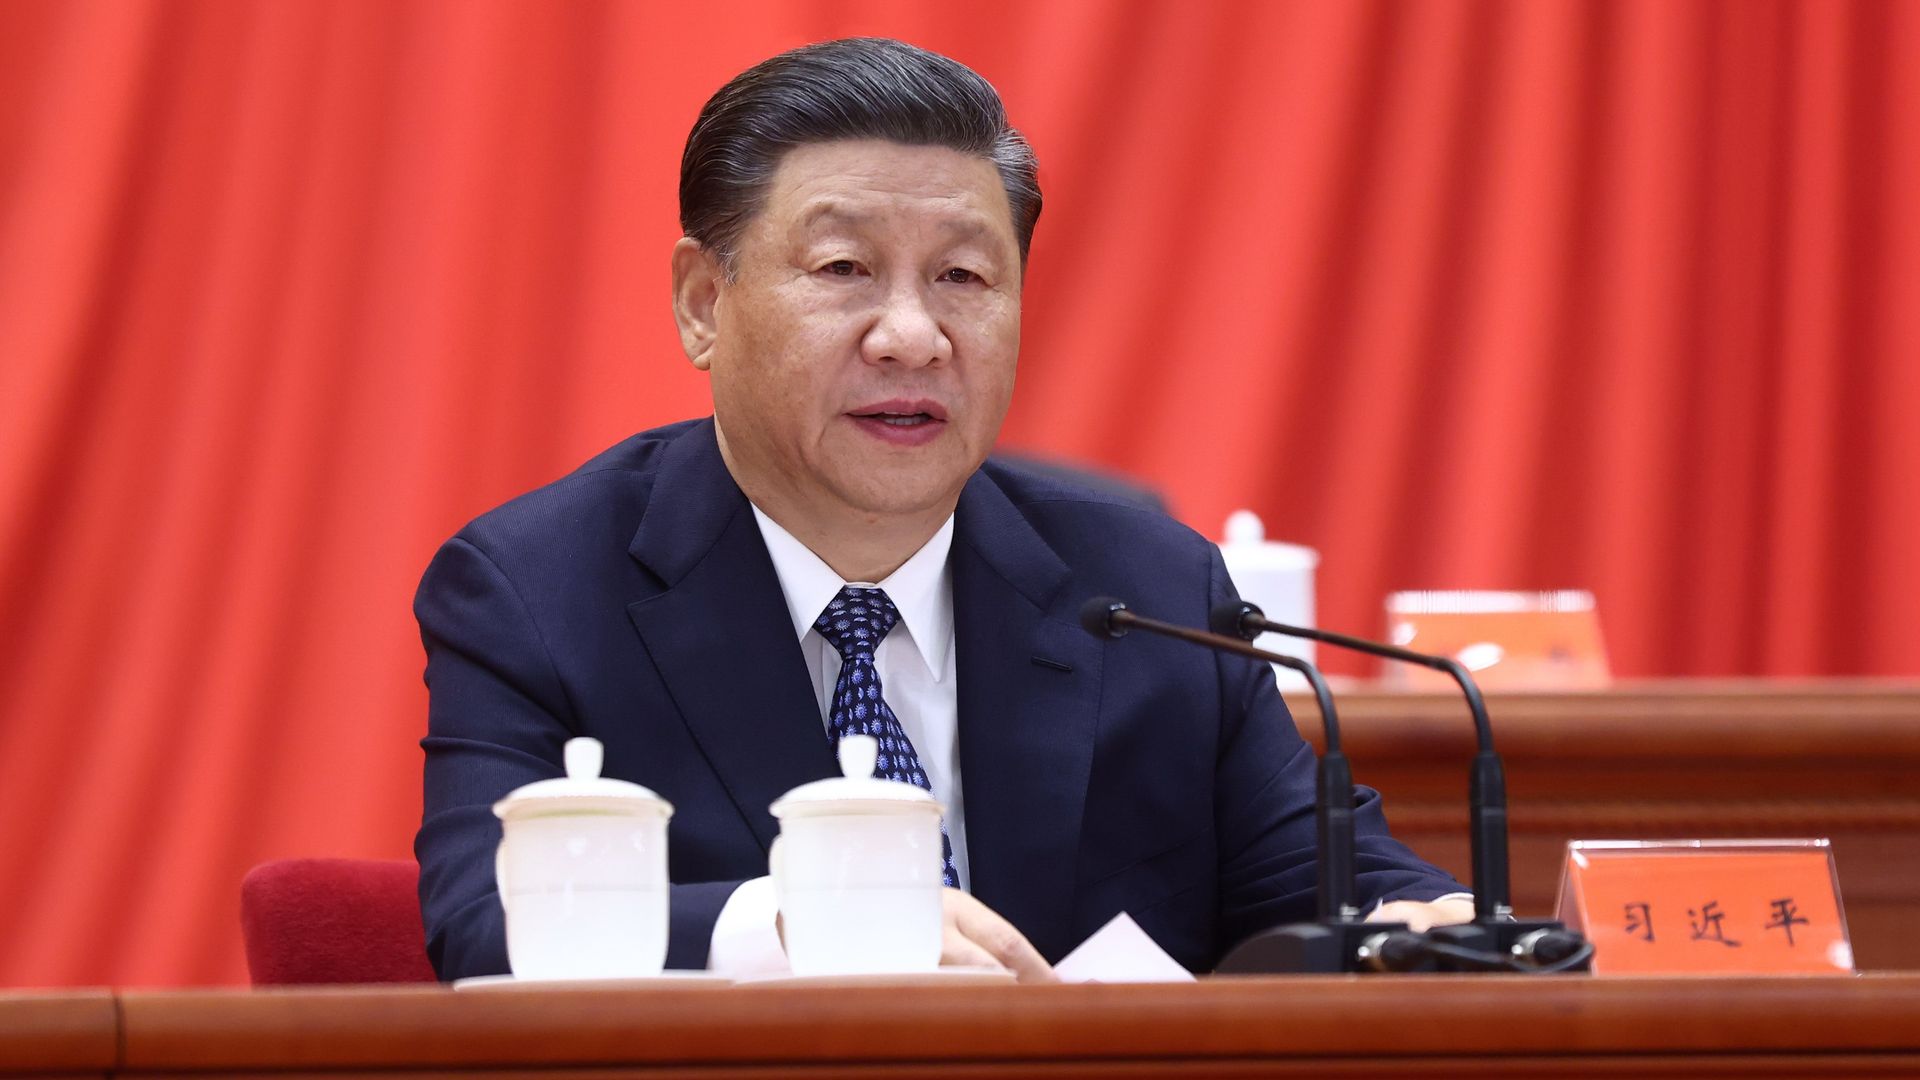 Chinese President Xi Jinping in Beijing in May 2021.